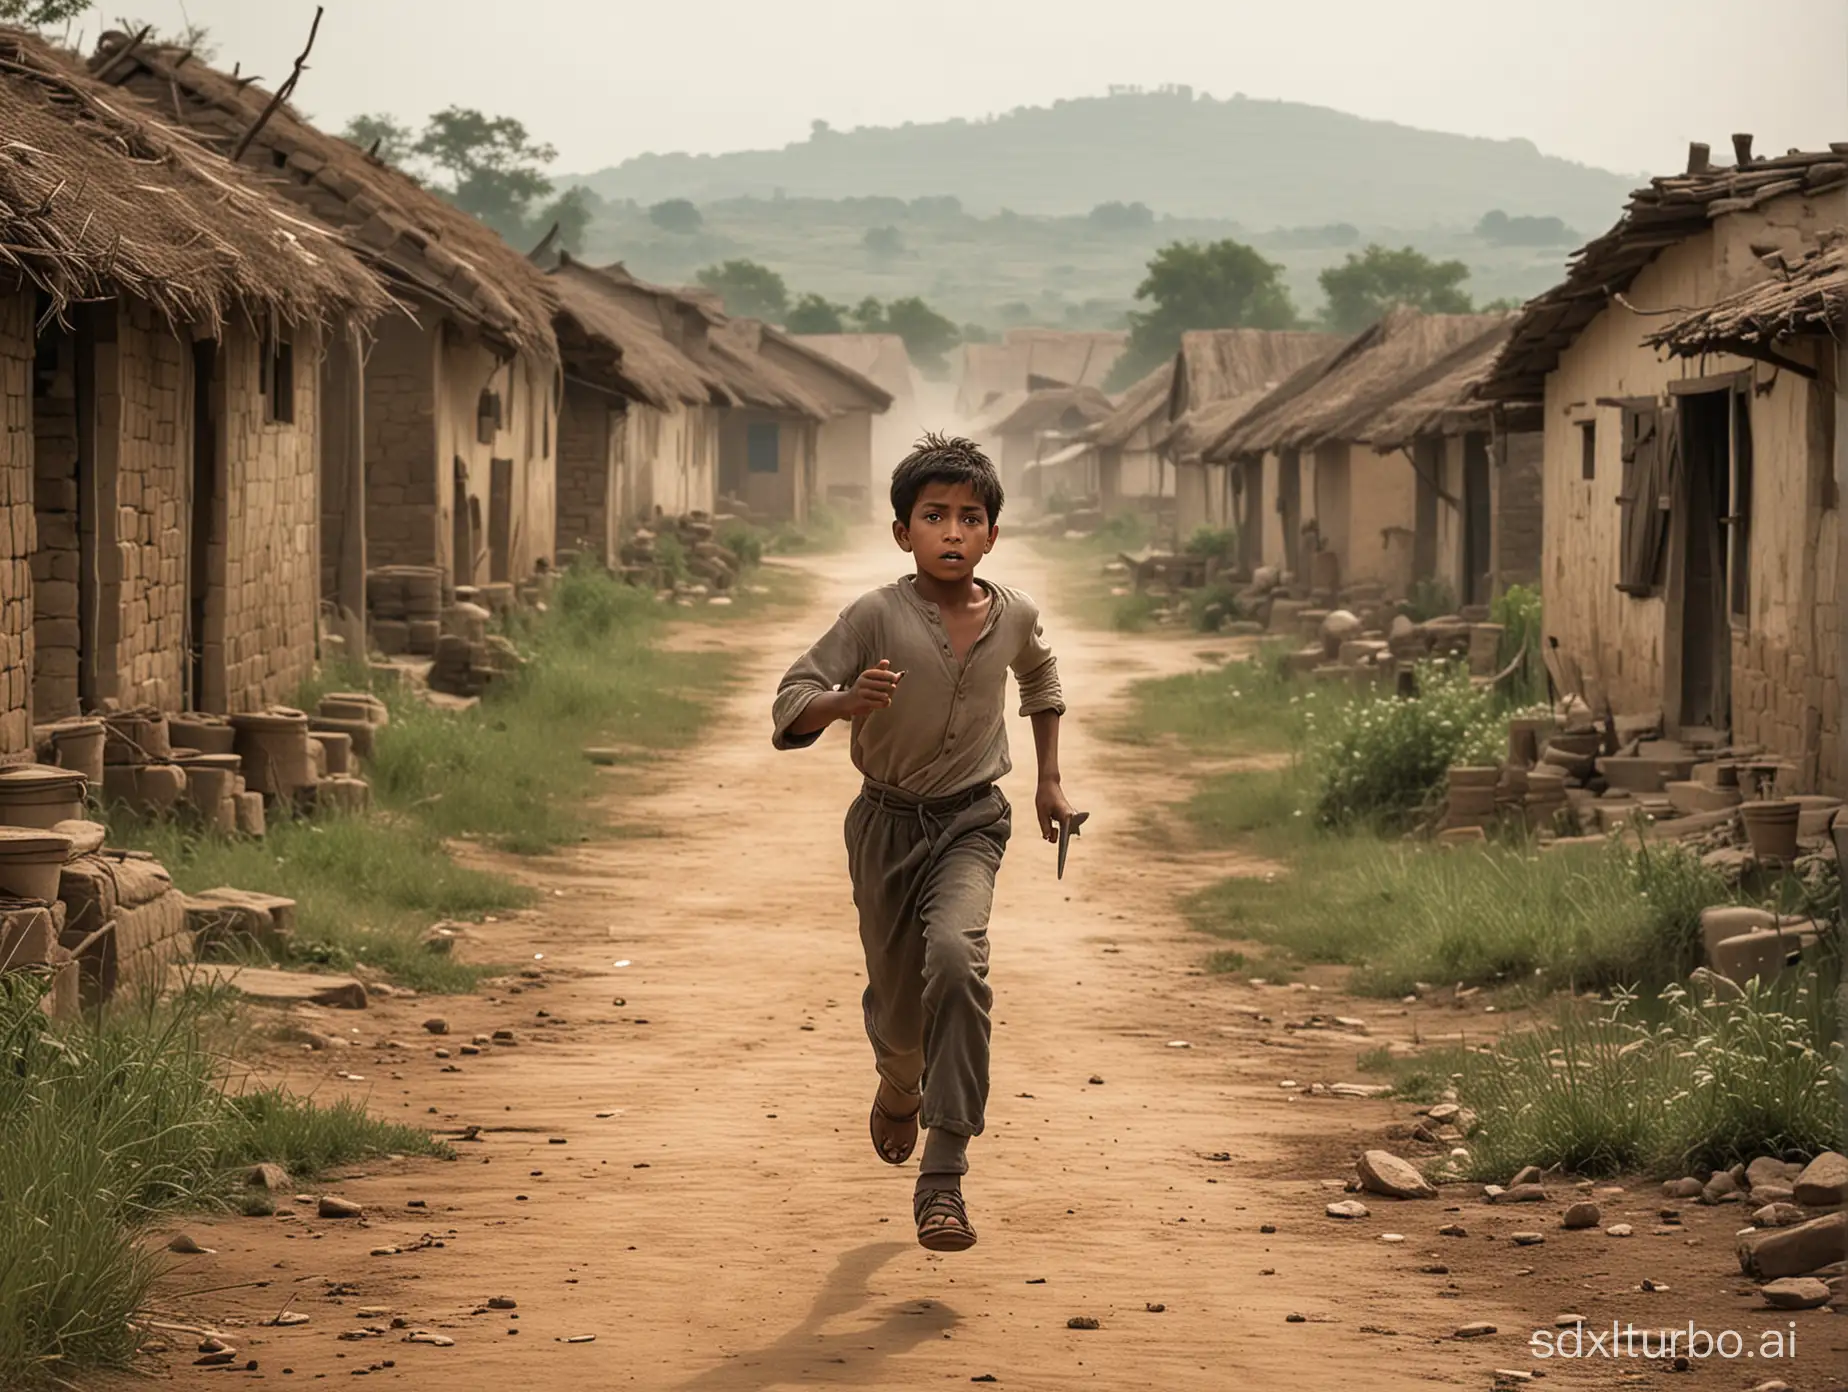 A boy running away from a village with a knife in his hand